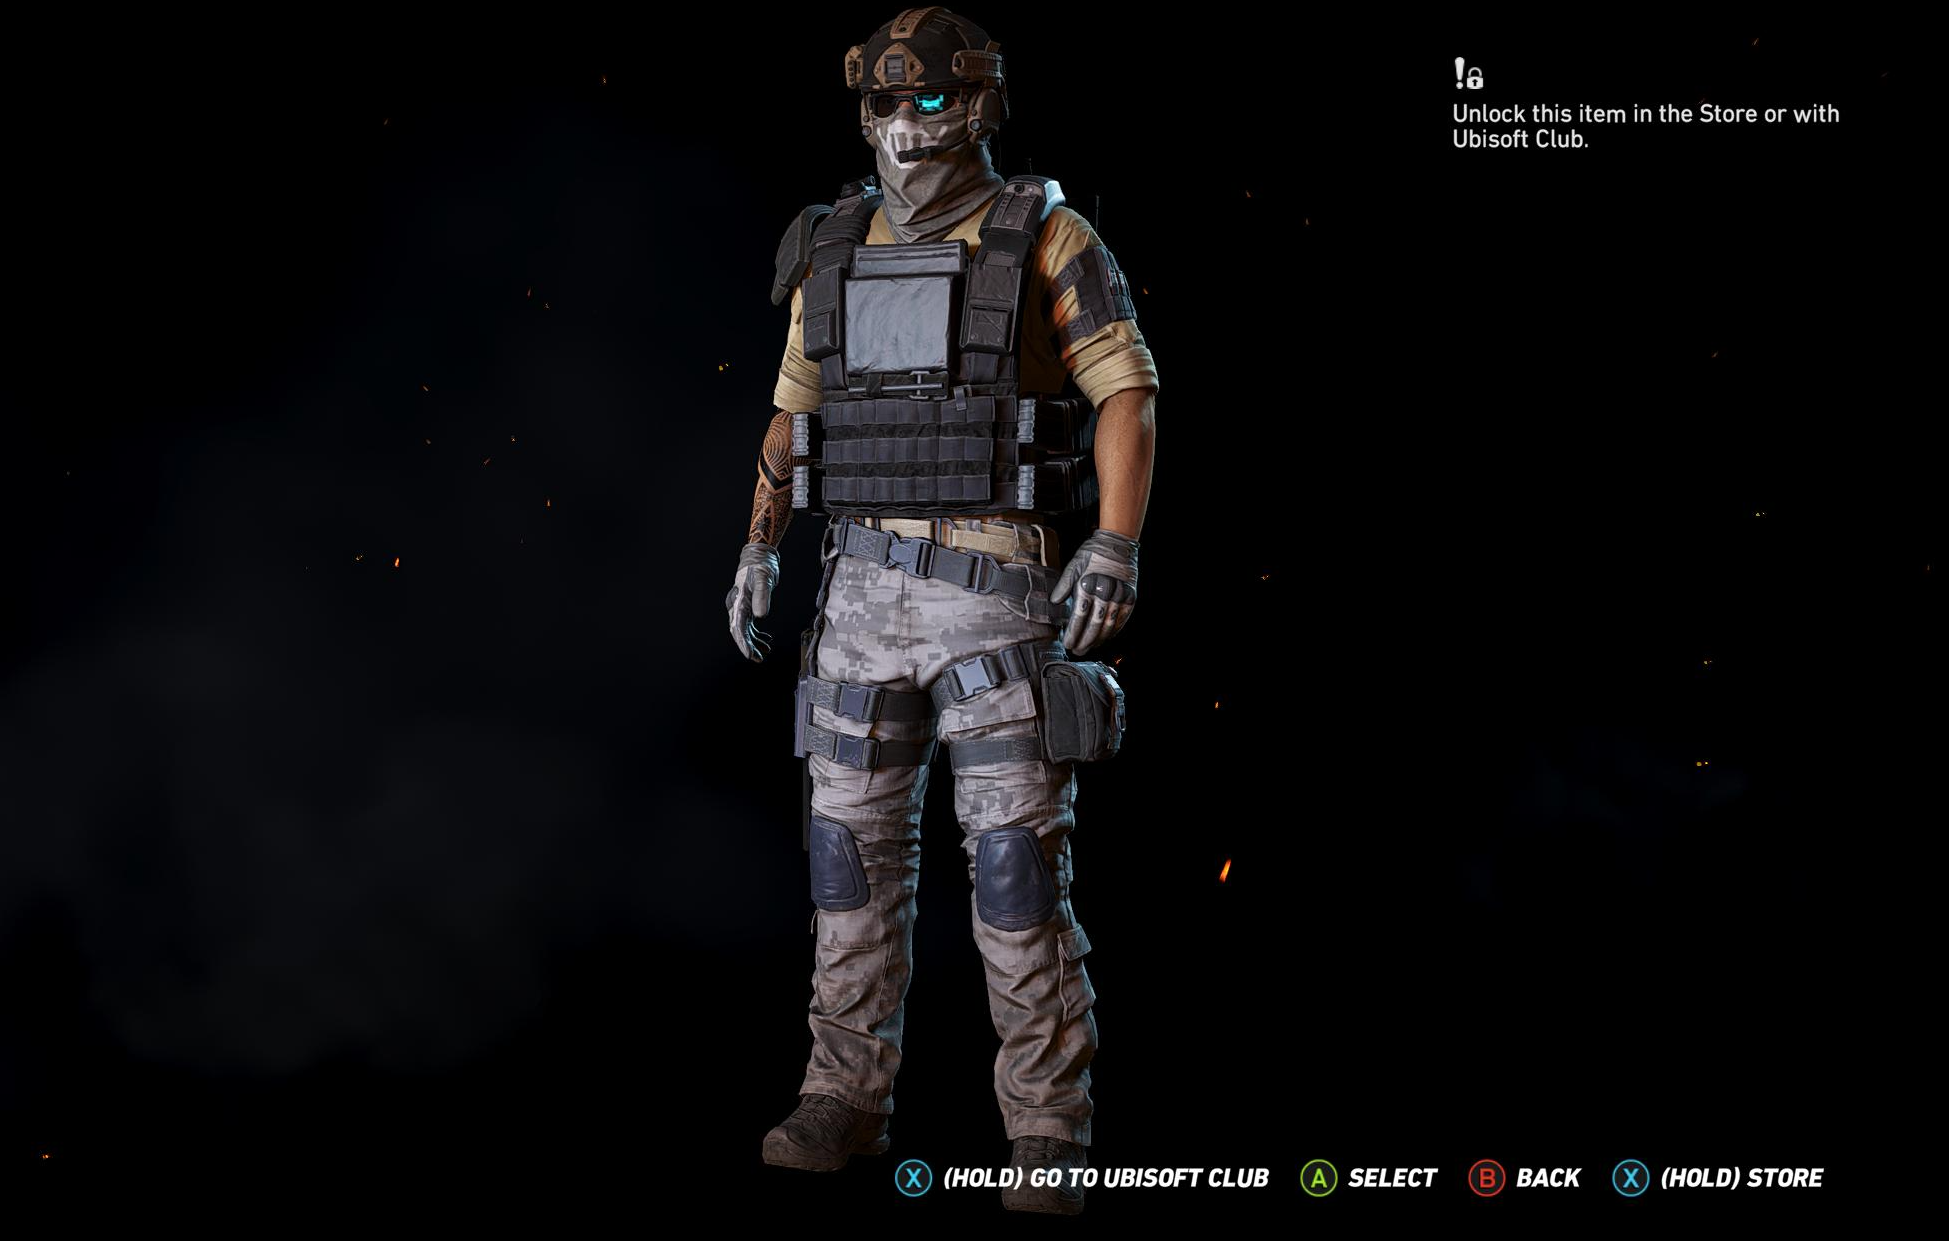 Sam Fisher Would Not Approve Of Ghost Recon’s Night Vision Goggles